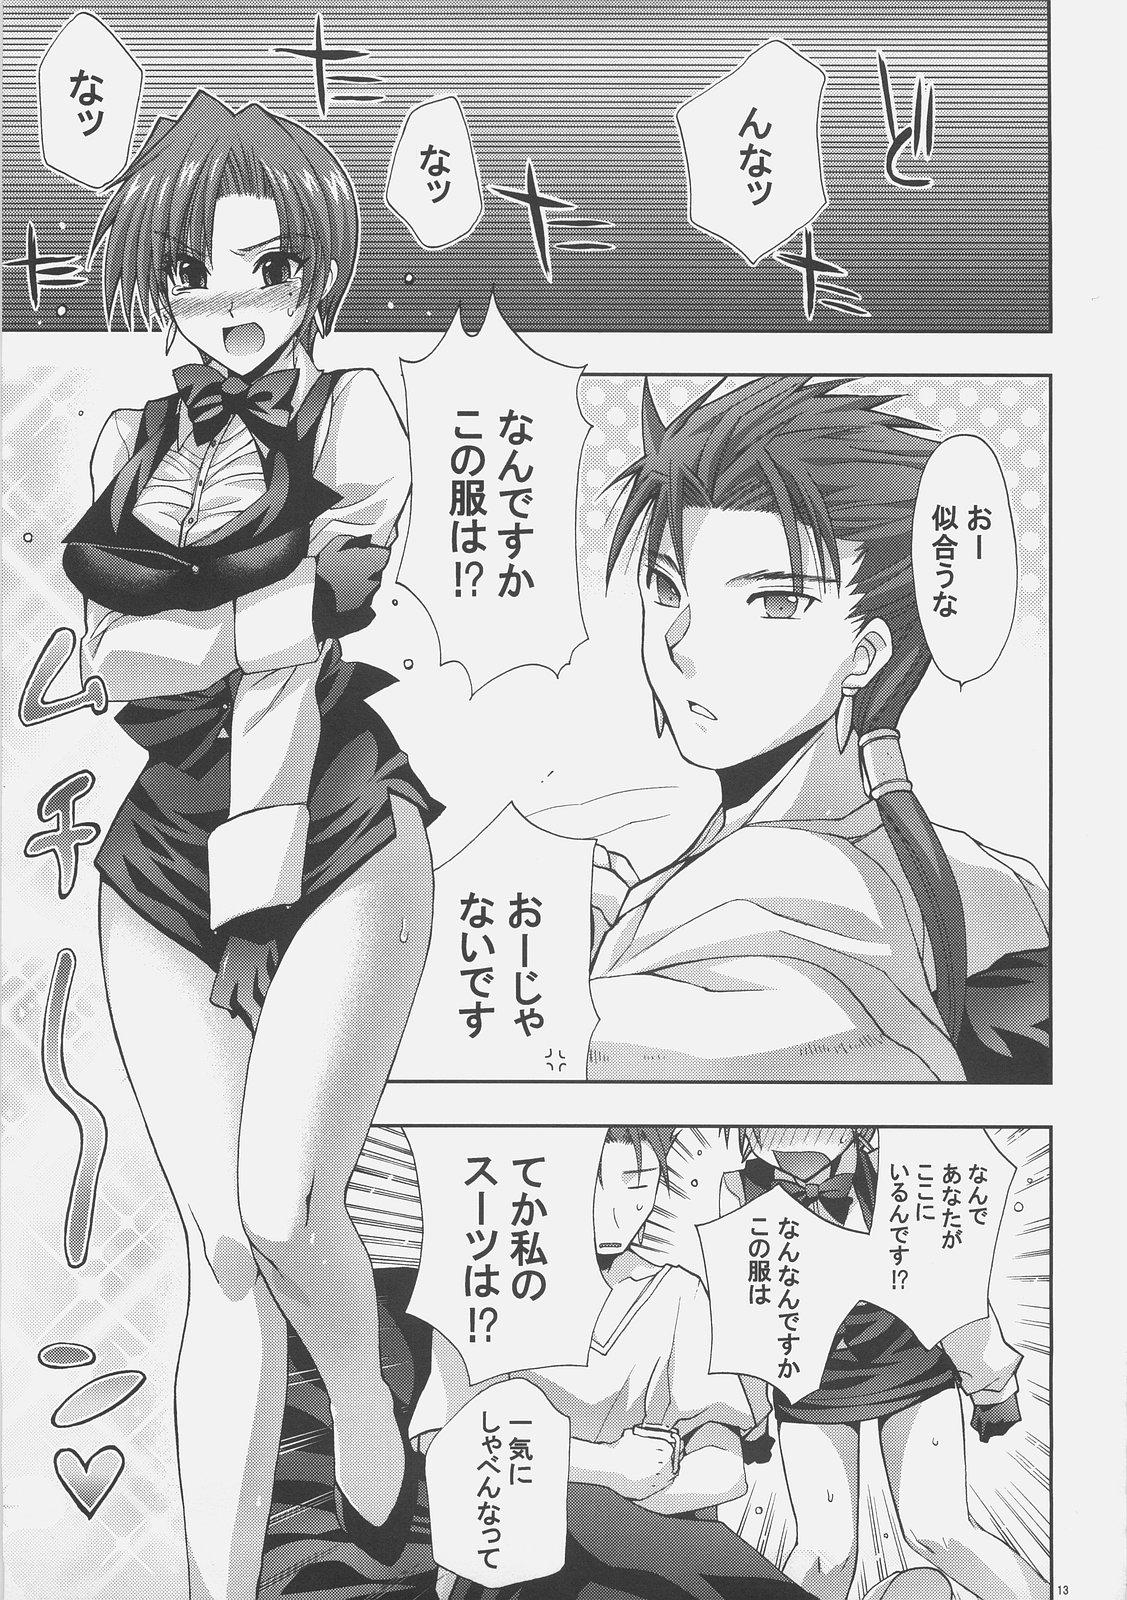 Twerk Getting Clothes - Fate hollow ataraxia Asiansex - Page 12